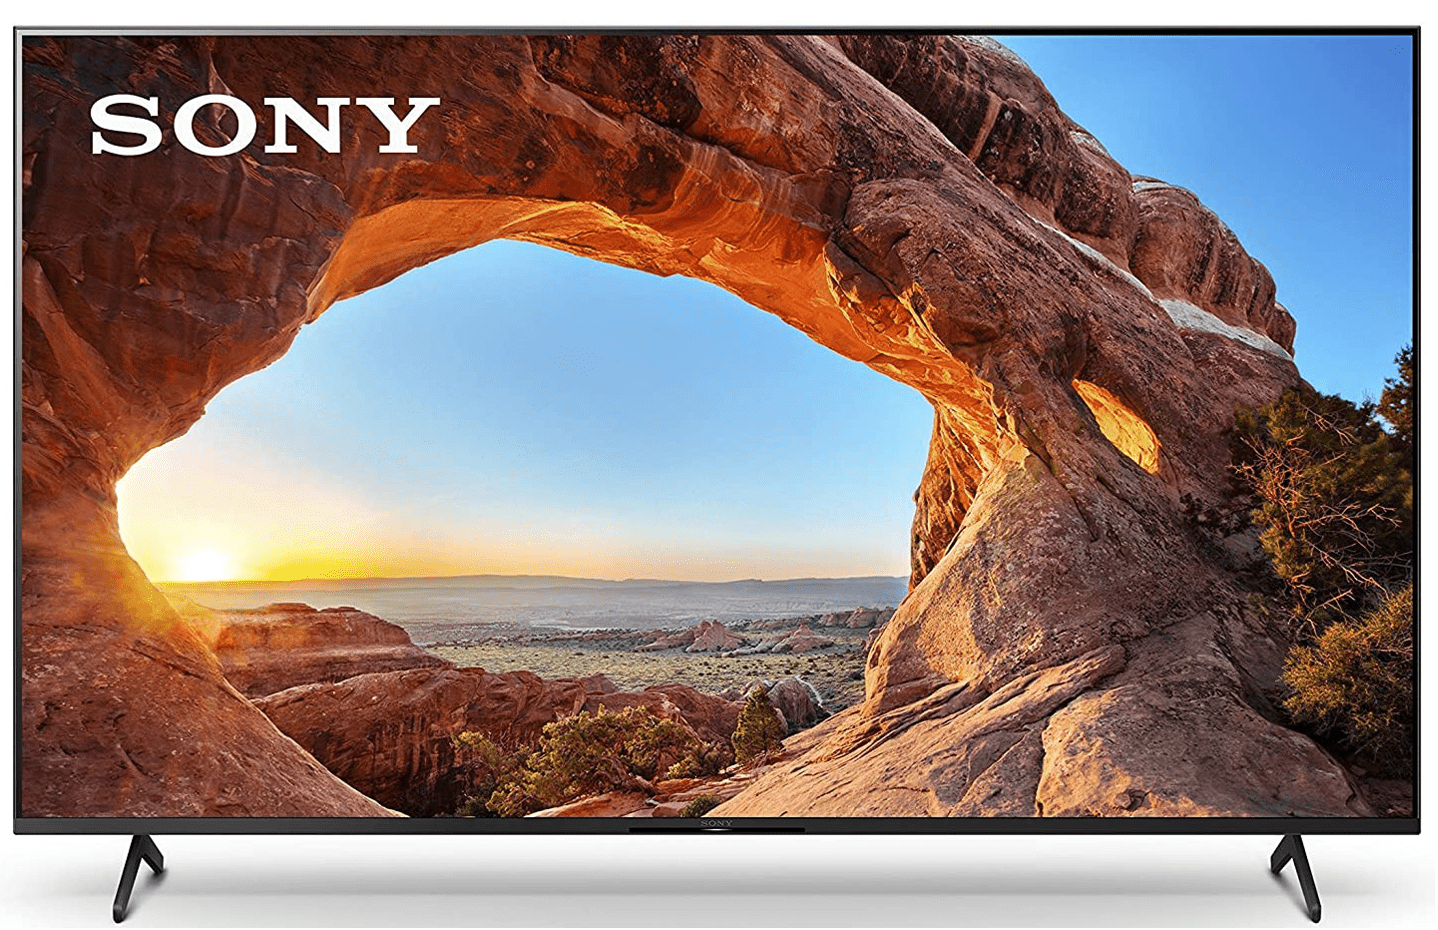 Sony X85J 43 Inch TV: 4K Ultra HD LED Smart Google TV with Native 120HZ Refresh Rate, Dolby Vision HDR, and Alexa Compatibility